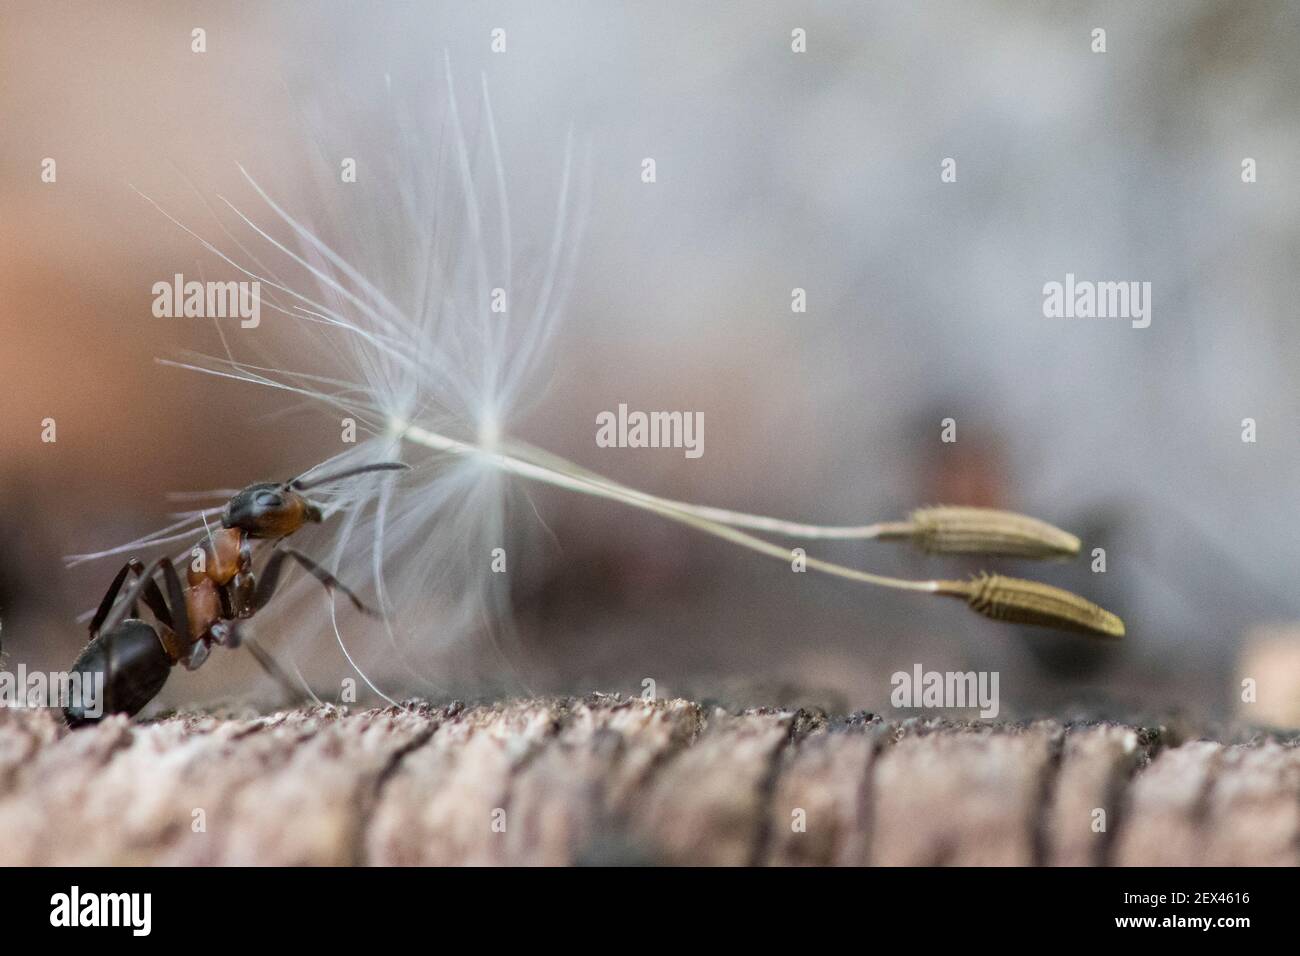 European Red Wood Ant (Formica polyctena) carrying dandelion achenes, Lorraine, France Stock Photo